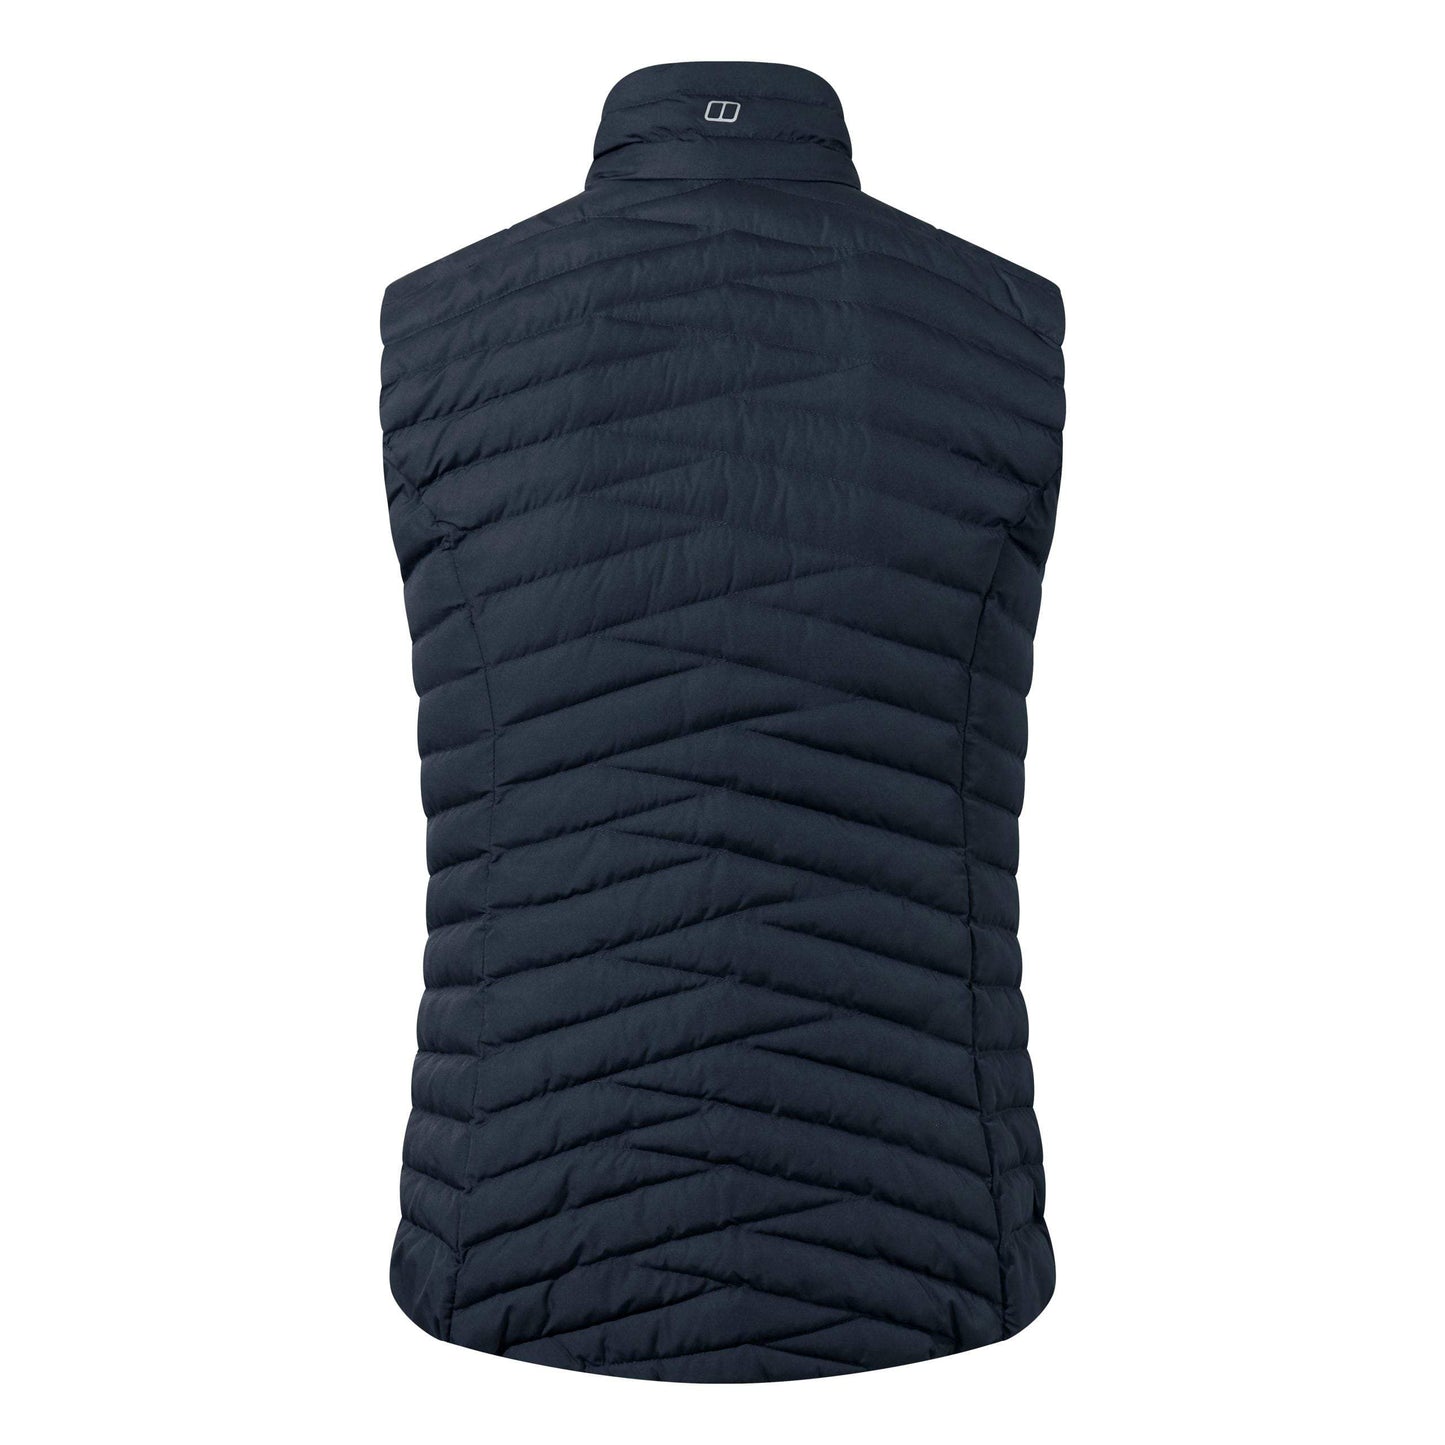 Berghaus Women’s Nula Micro Vest - The Luxury Promotional Gifts Company Limited